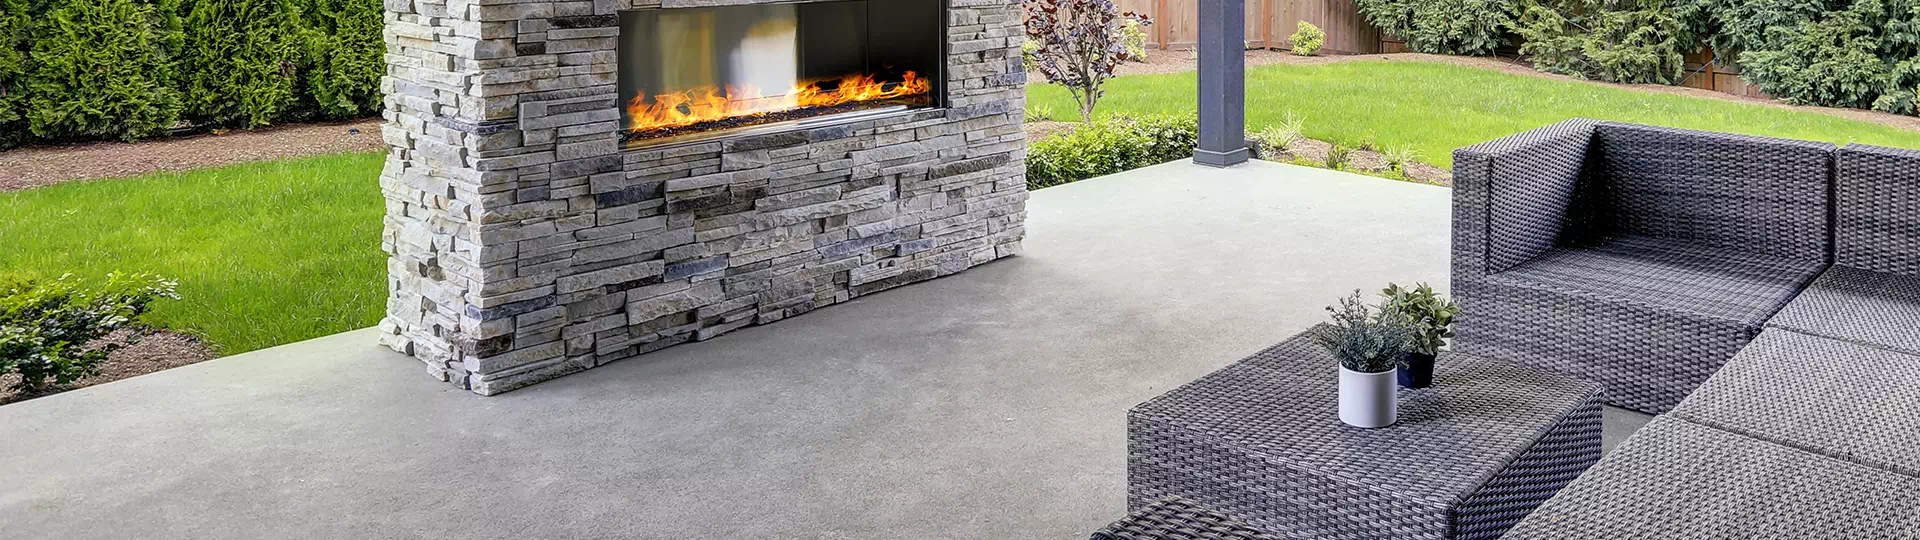 How To Clean A Concrete Patio Simple, How To Clean Painted Concrete Patio